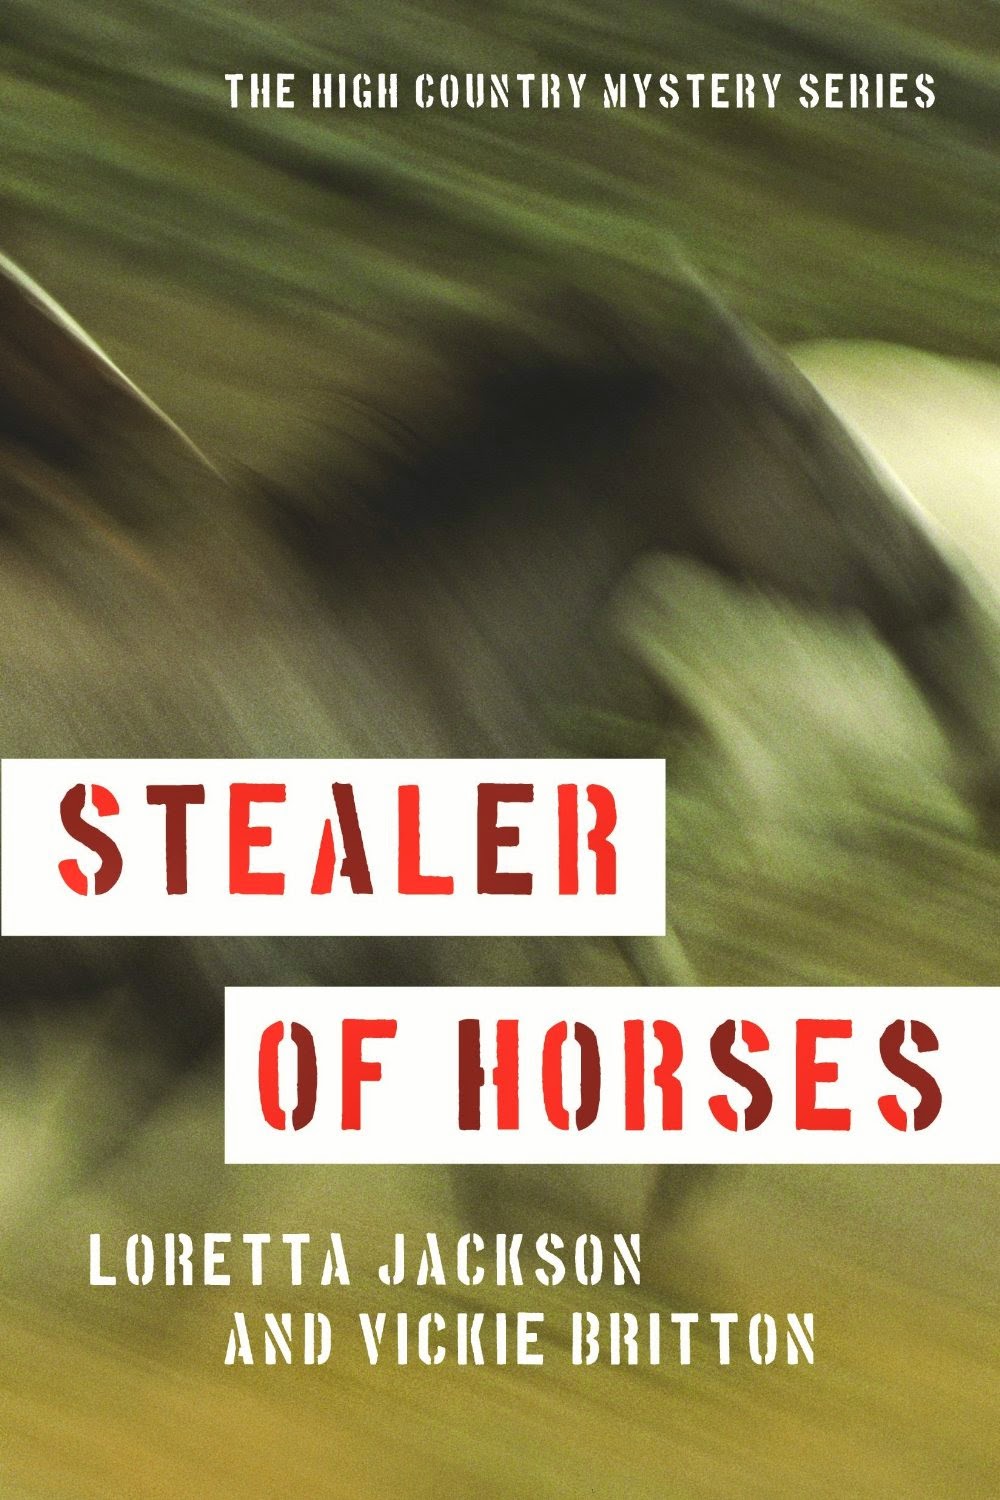 STEALER OF HORSES--Special Price $2.49!